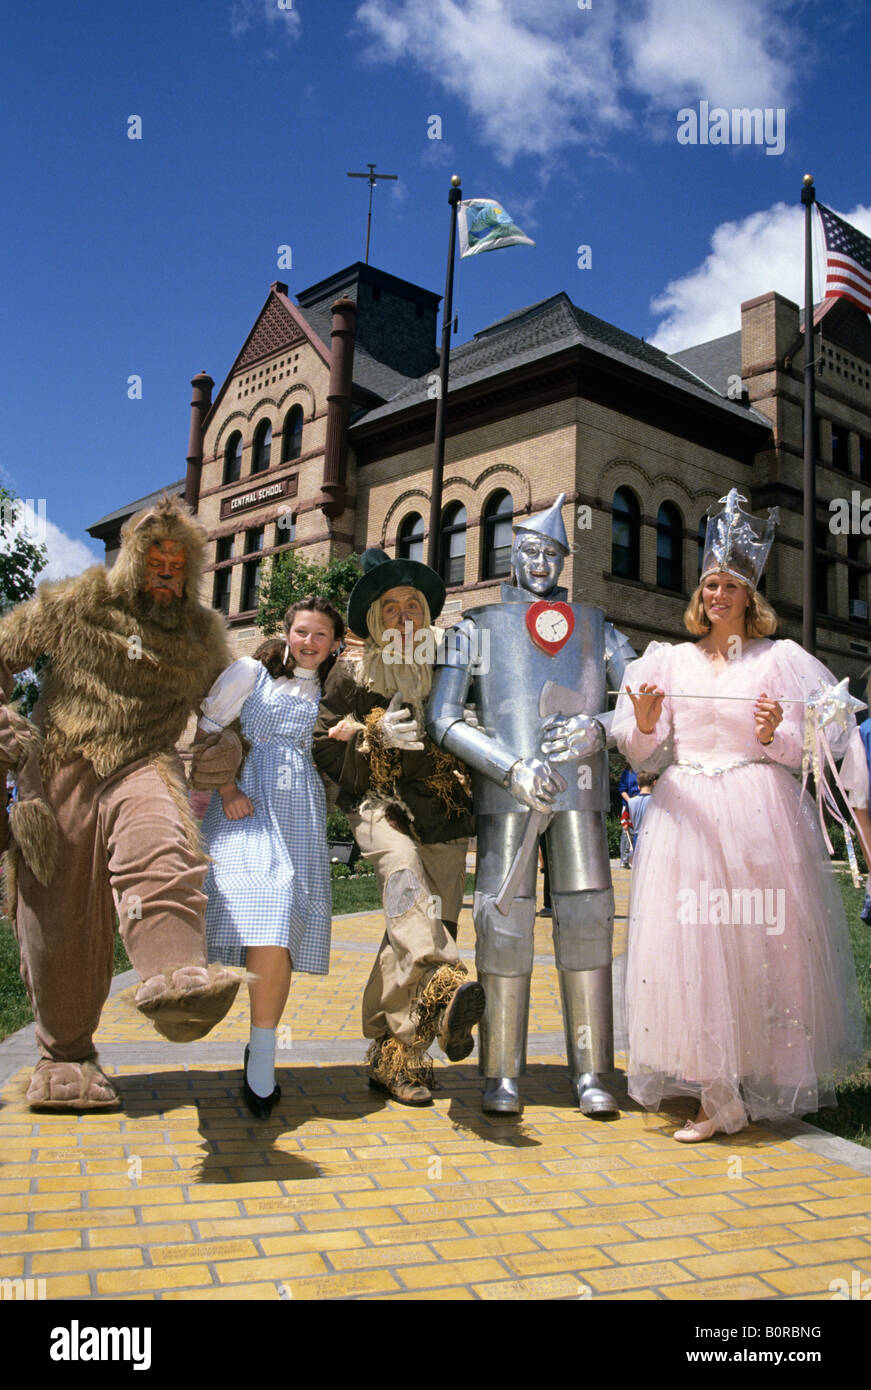 WIZARD OF OZ CHARACTERS DURING JUDY GARLAND DAYS IN GRAND RAPIDS, MINNESOTA. SUMMER. Stock Photo